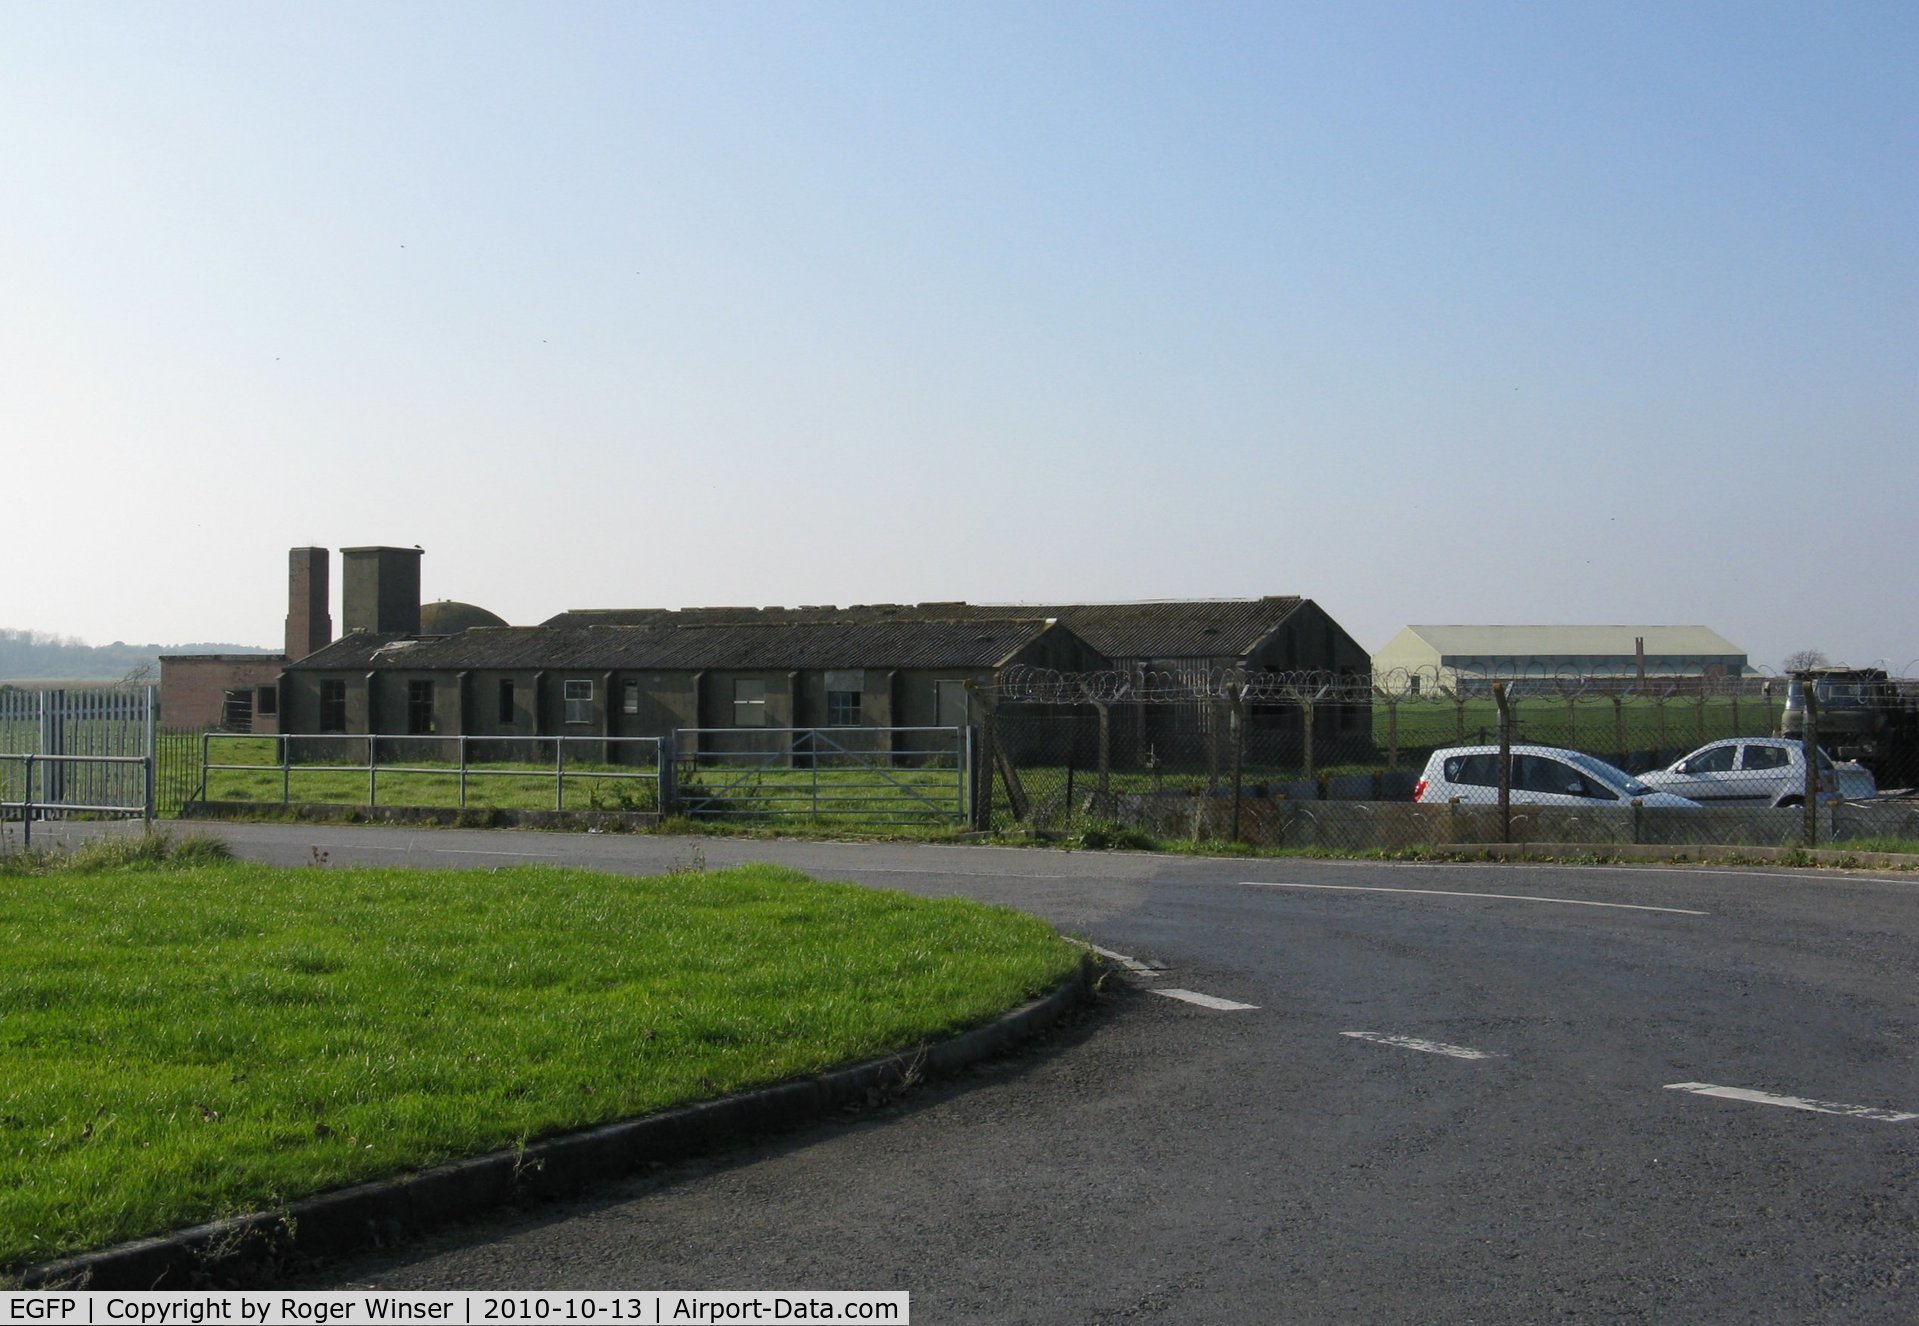 Pembrey Airport, Pembrey, Wales United Kingdom (EGFP) - The remains of buildings used as the WAAF Institute situated on the former RAF Station Pembrey technical site.